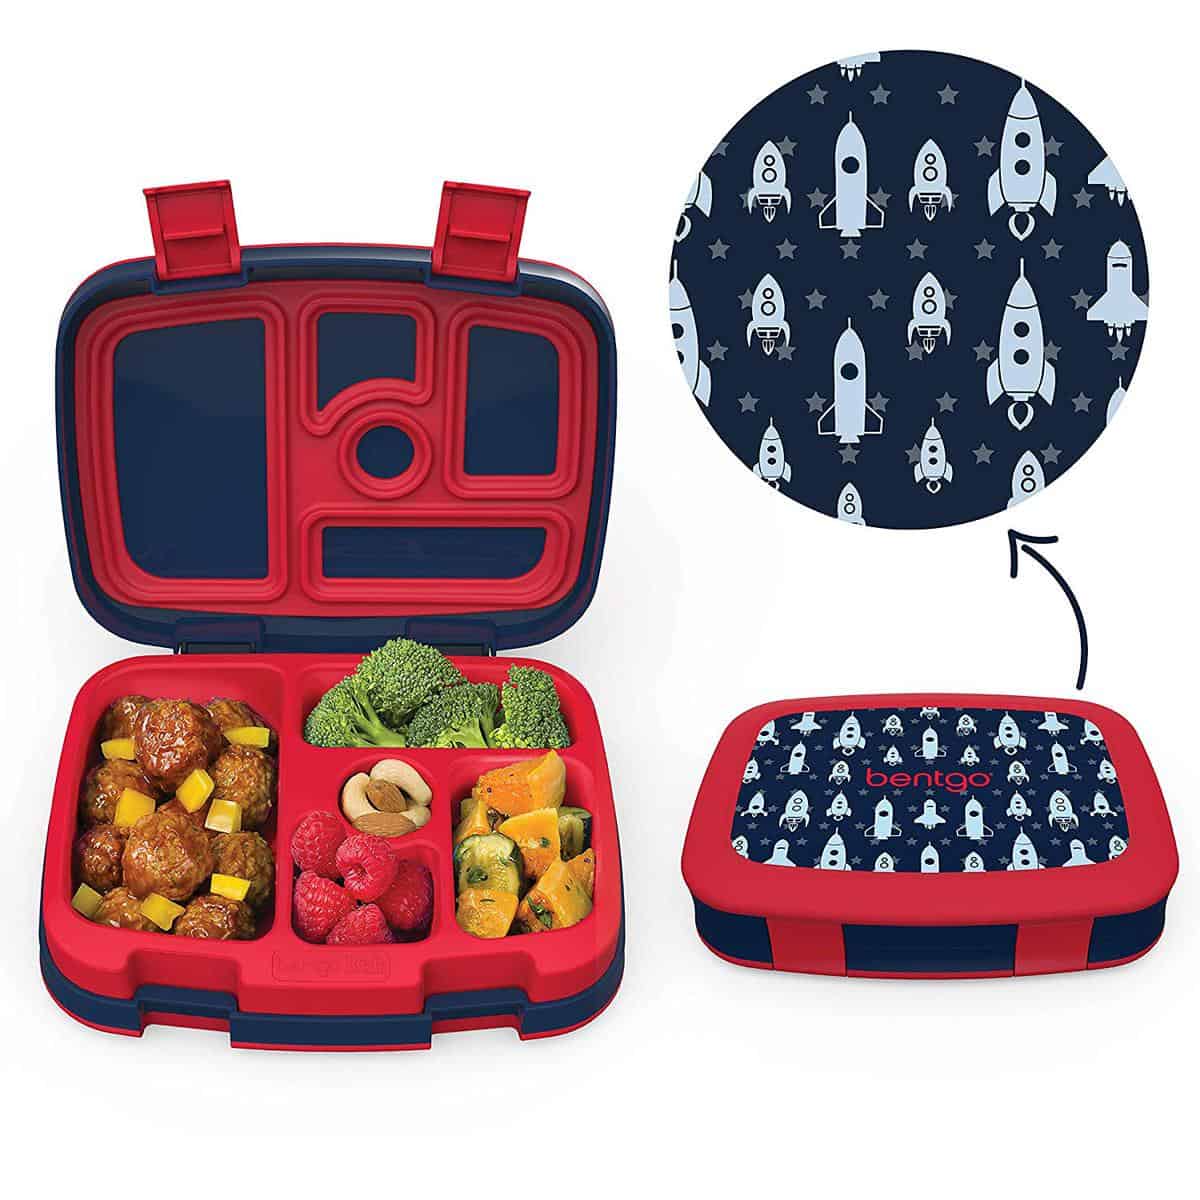 Closeup of inside of Bentgo Space Rockets lunchbox showing 5 food compartments.